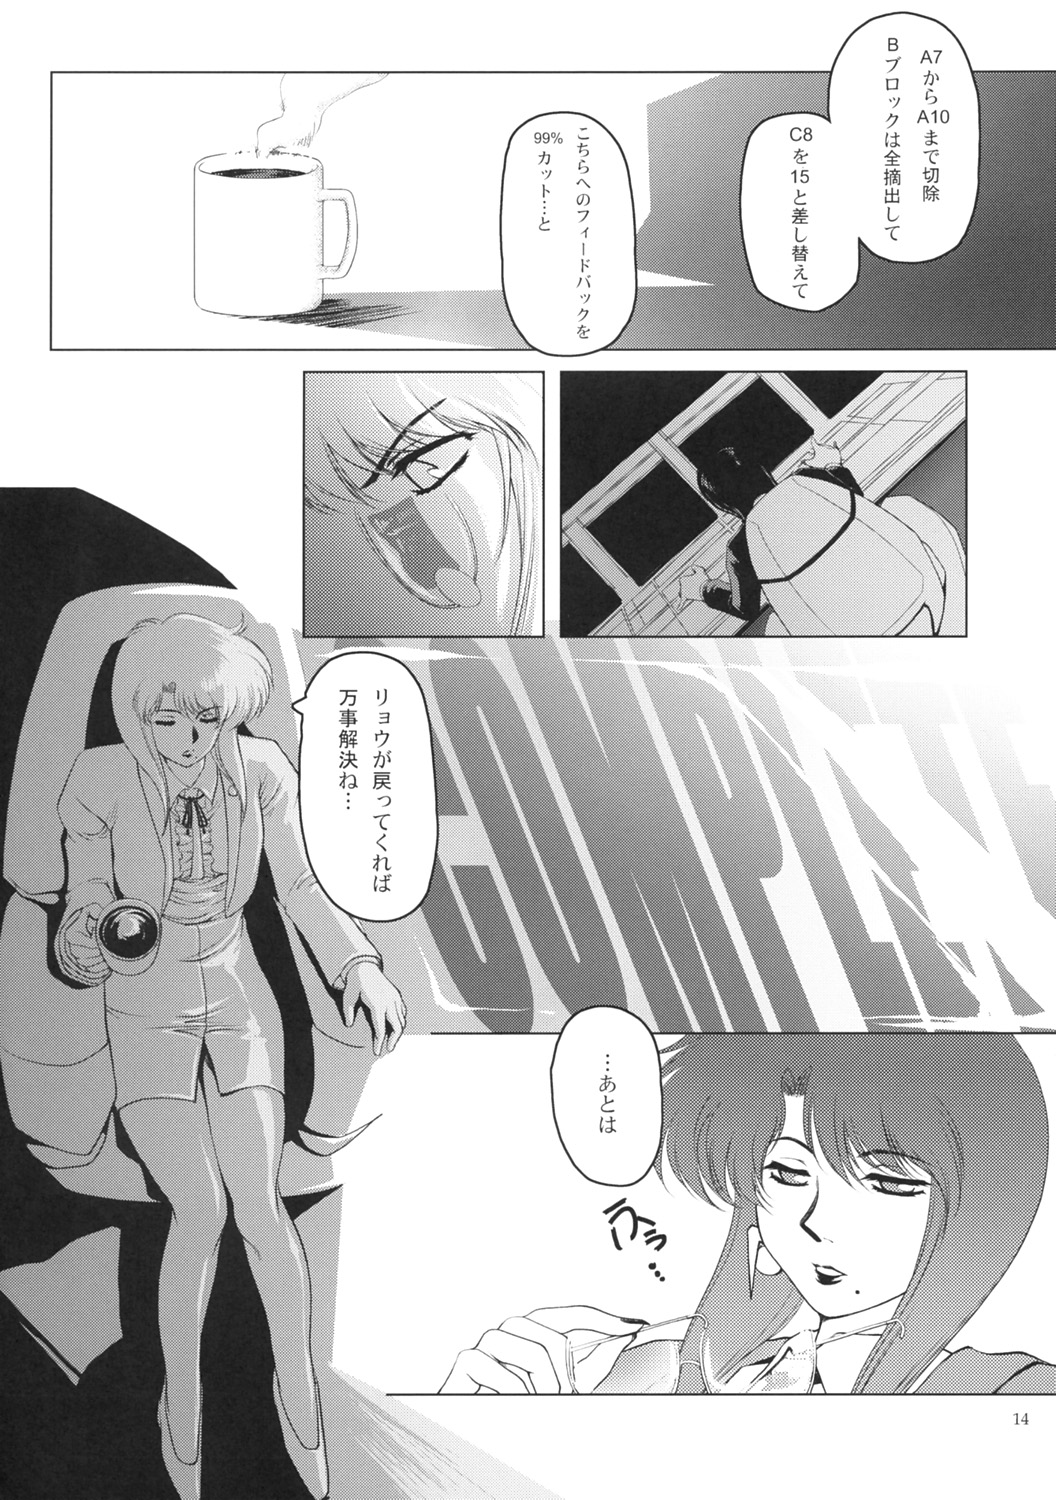 (C67) [Type-R (Rance)] Manga Onsoku no Are (Sonic Soldier Borgman) page 15 full